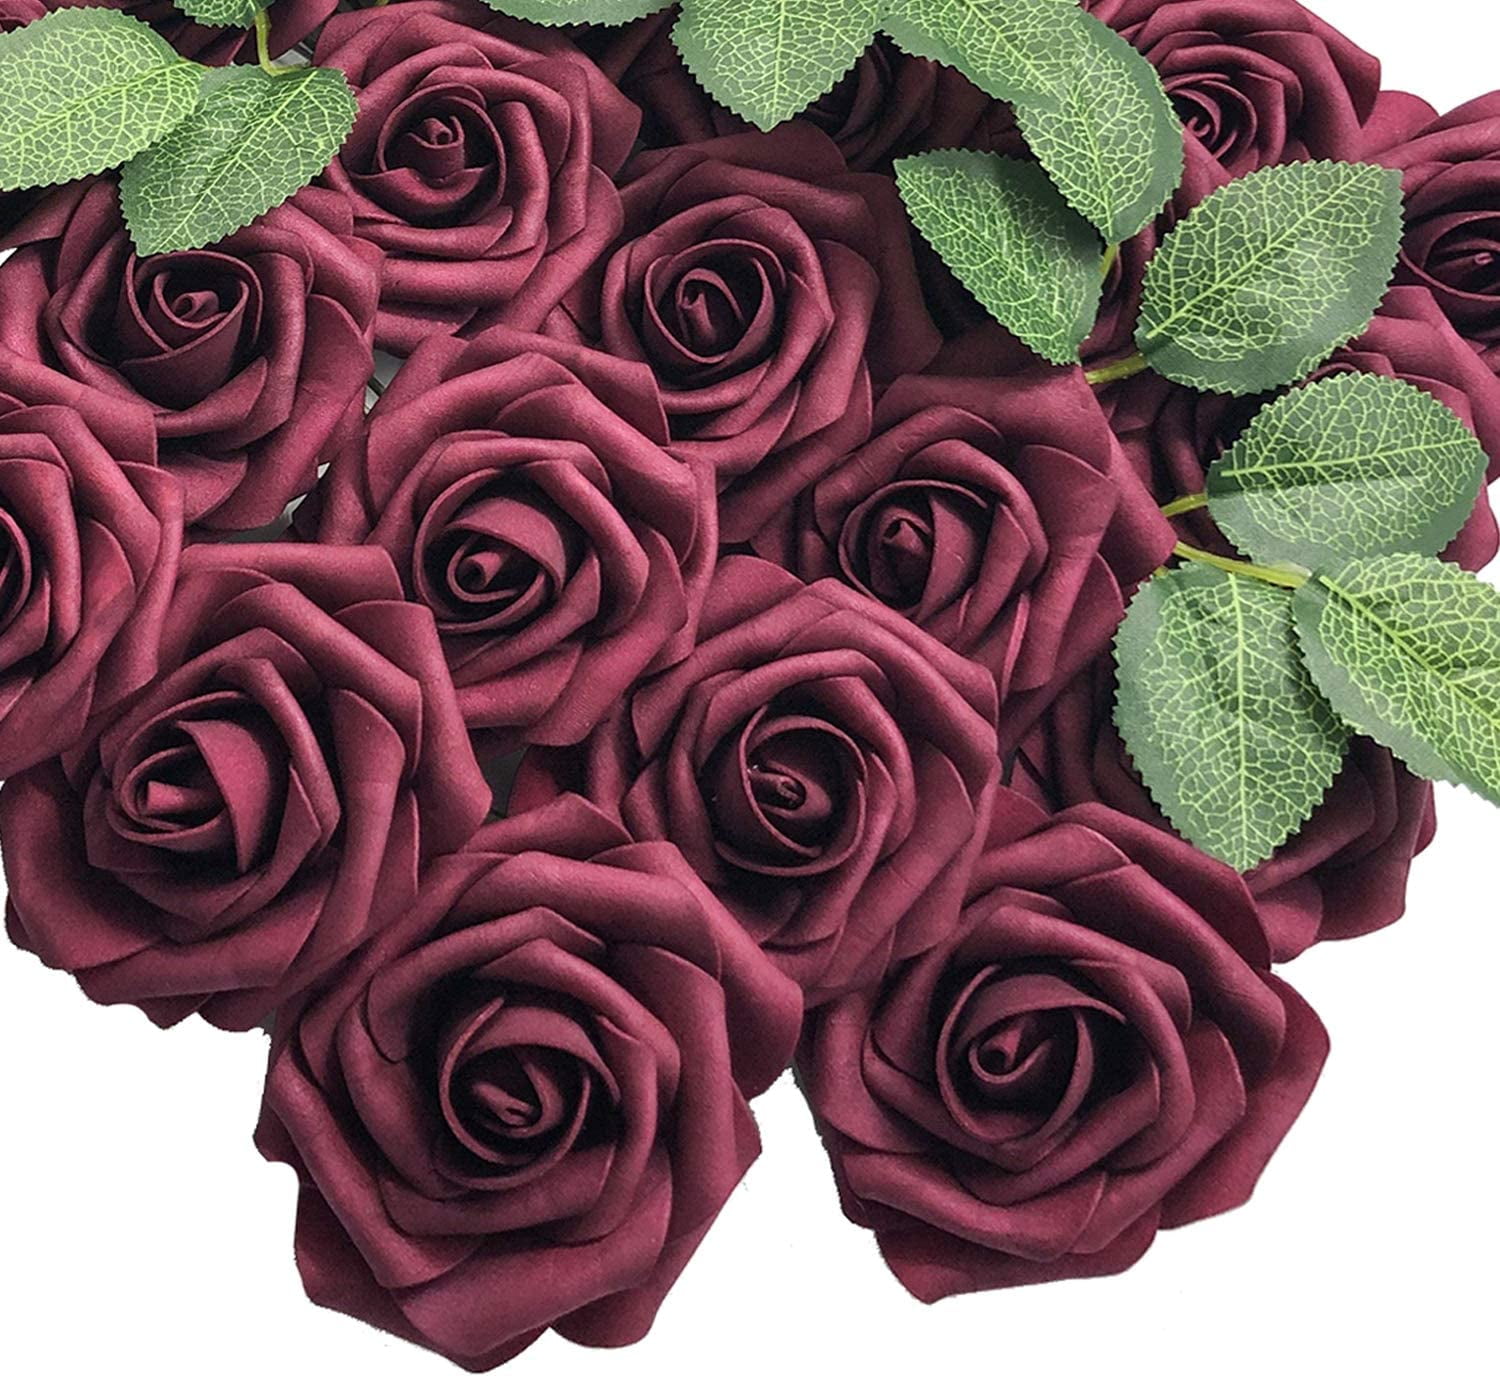 Artificial Flowers 25Pcs Real Looking Burgundy Fake Roses with Stems for DIY WR1 